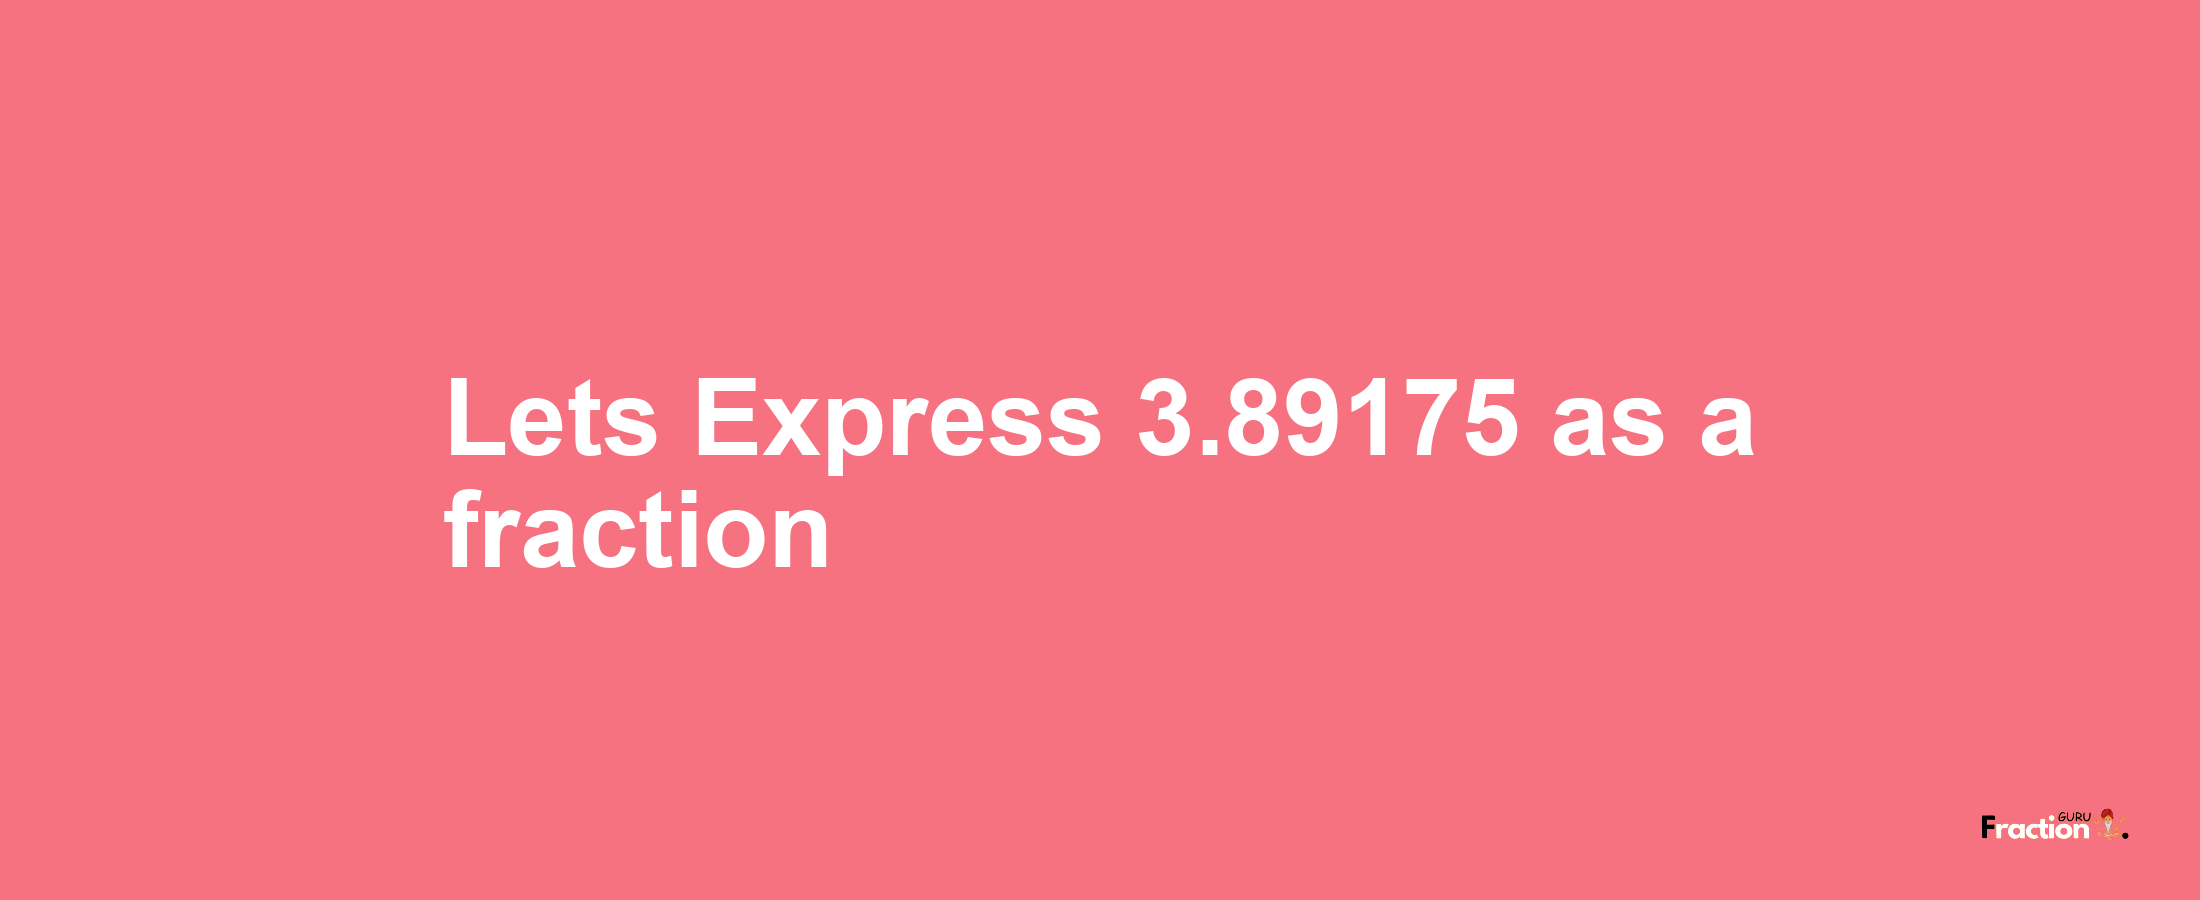 Lets Express 3.89175 as afraction